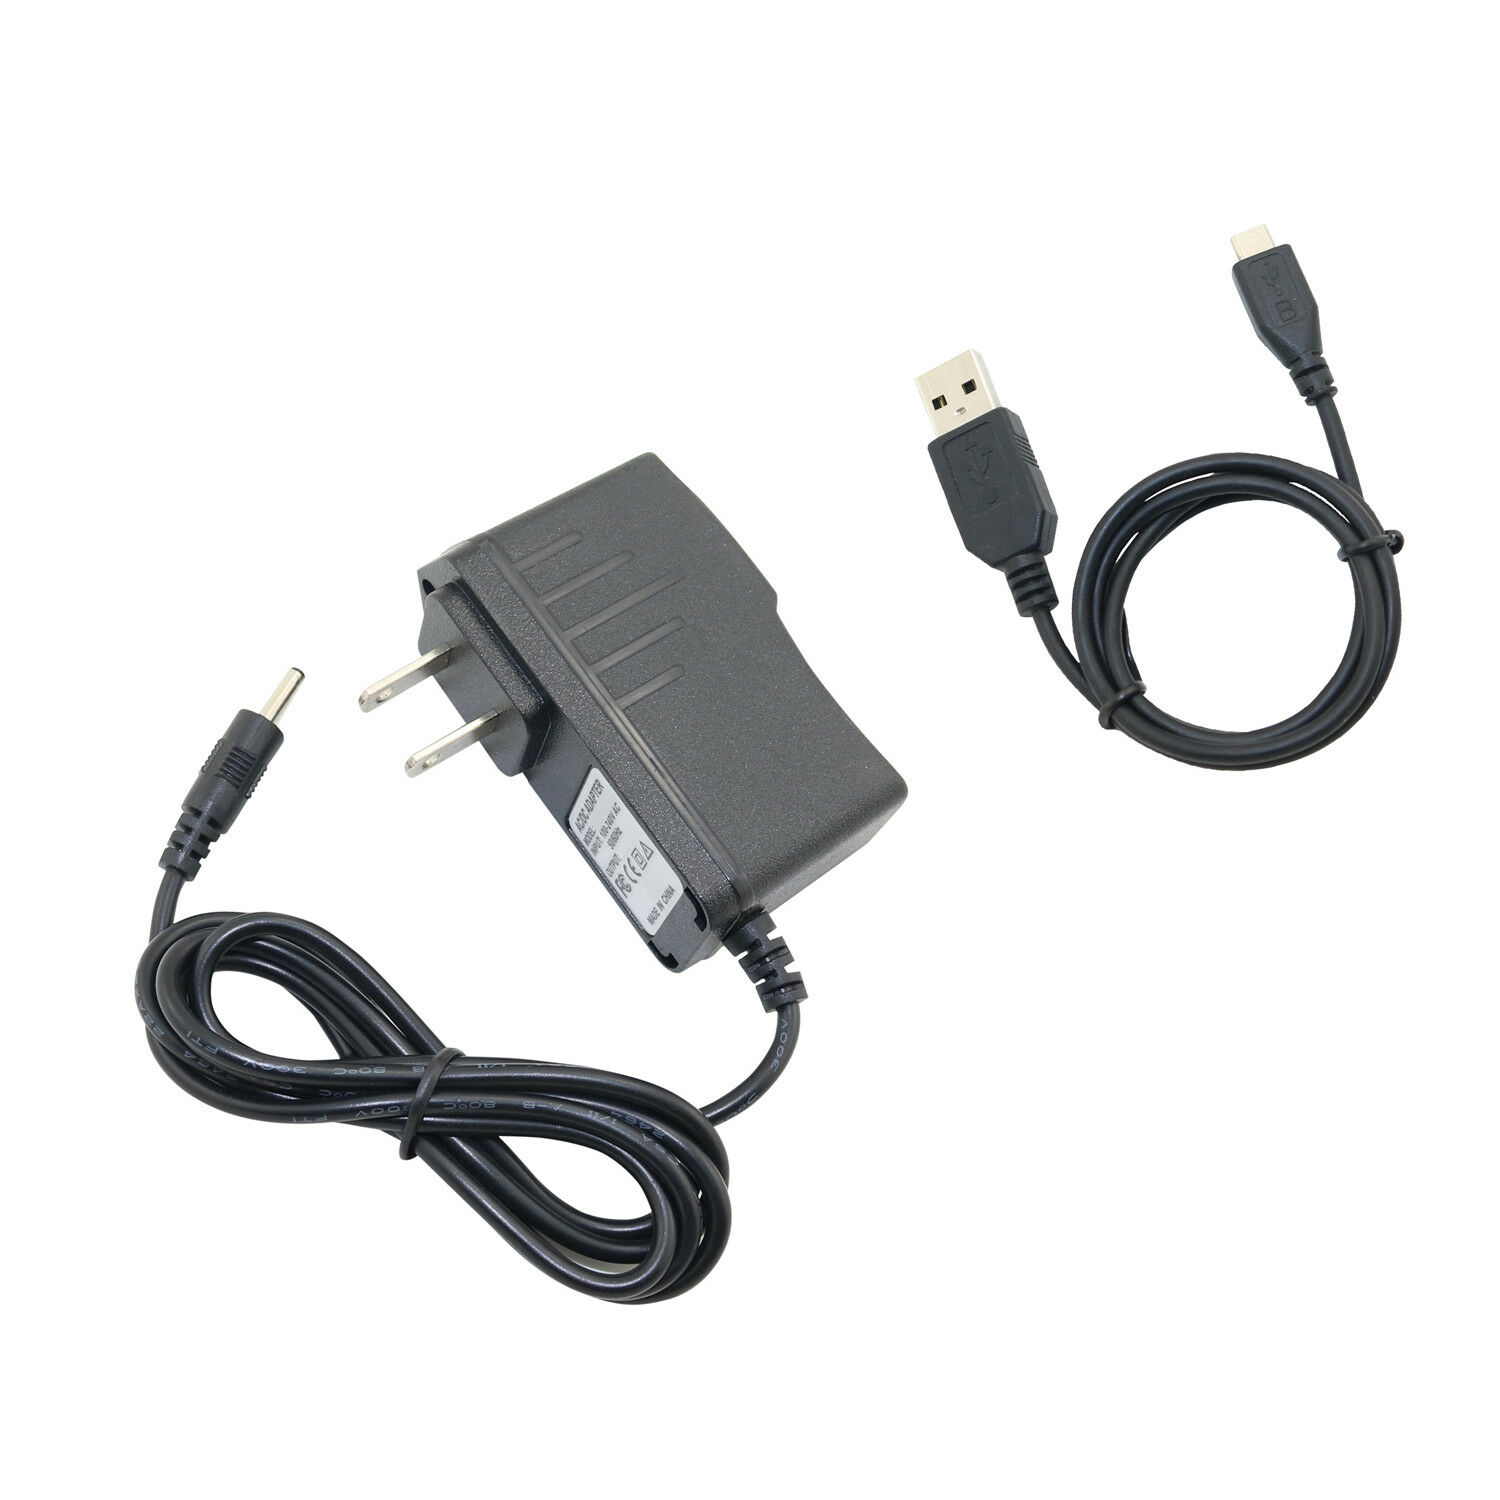 AC/DC Adapter Power Charger USB Cord for Mach Speed Trio Stealth G2 8" Tablet 